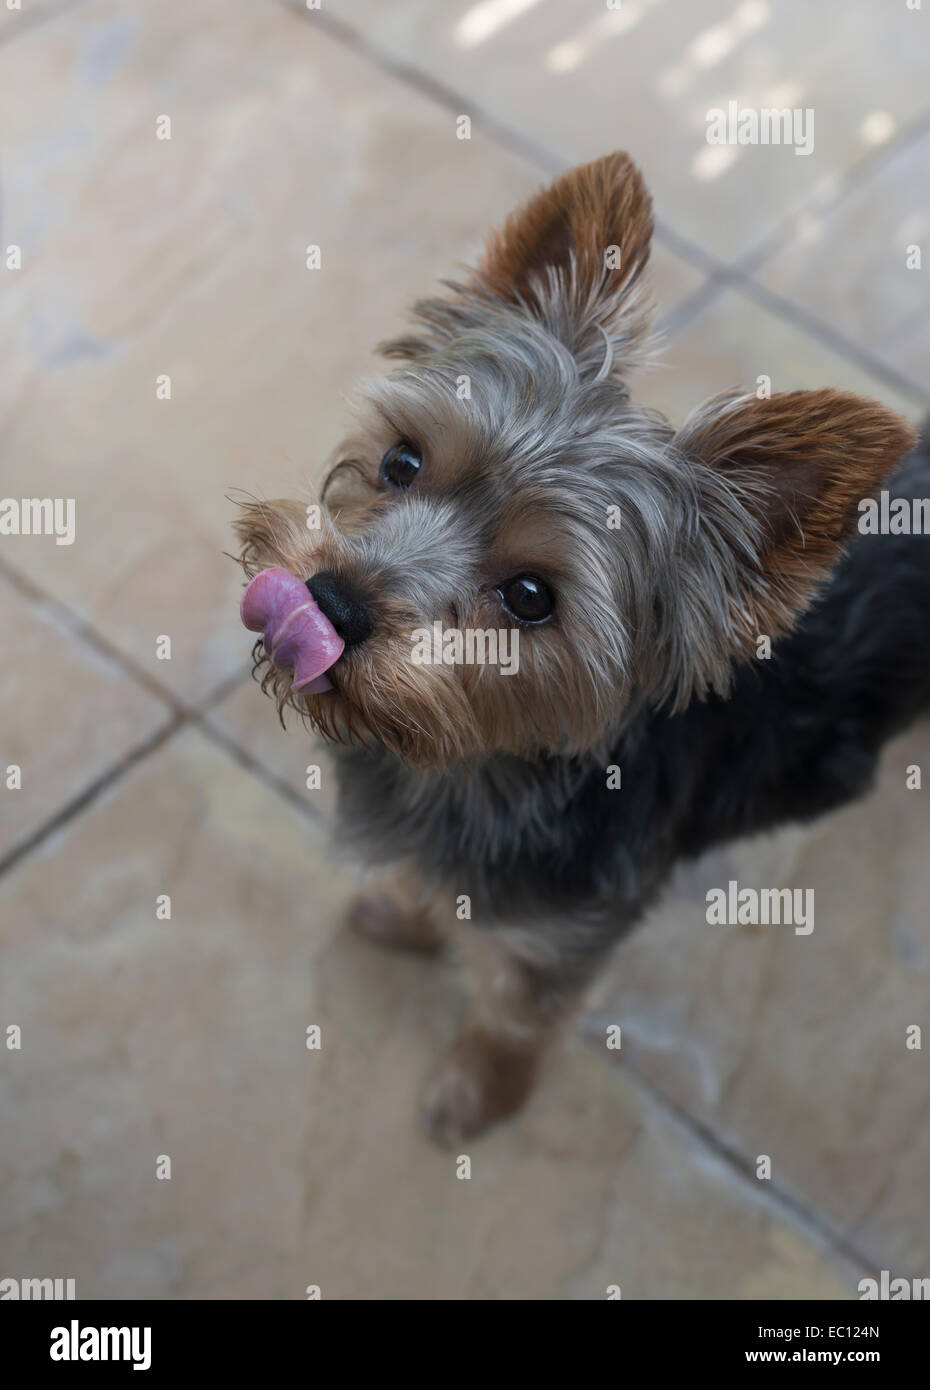 A Yorkshire Terrier licking its lips. Stock Photo